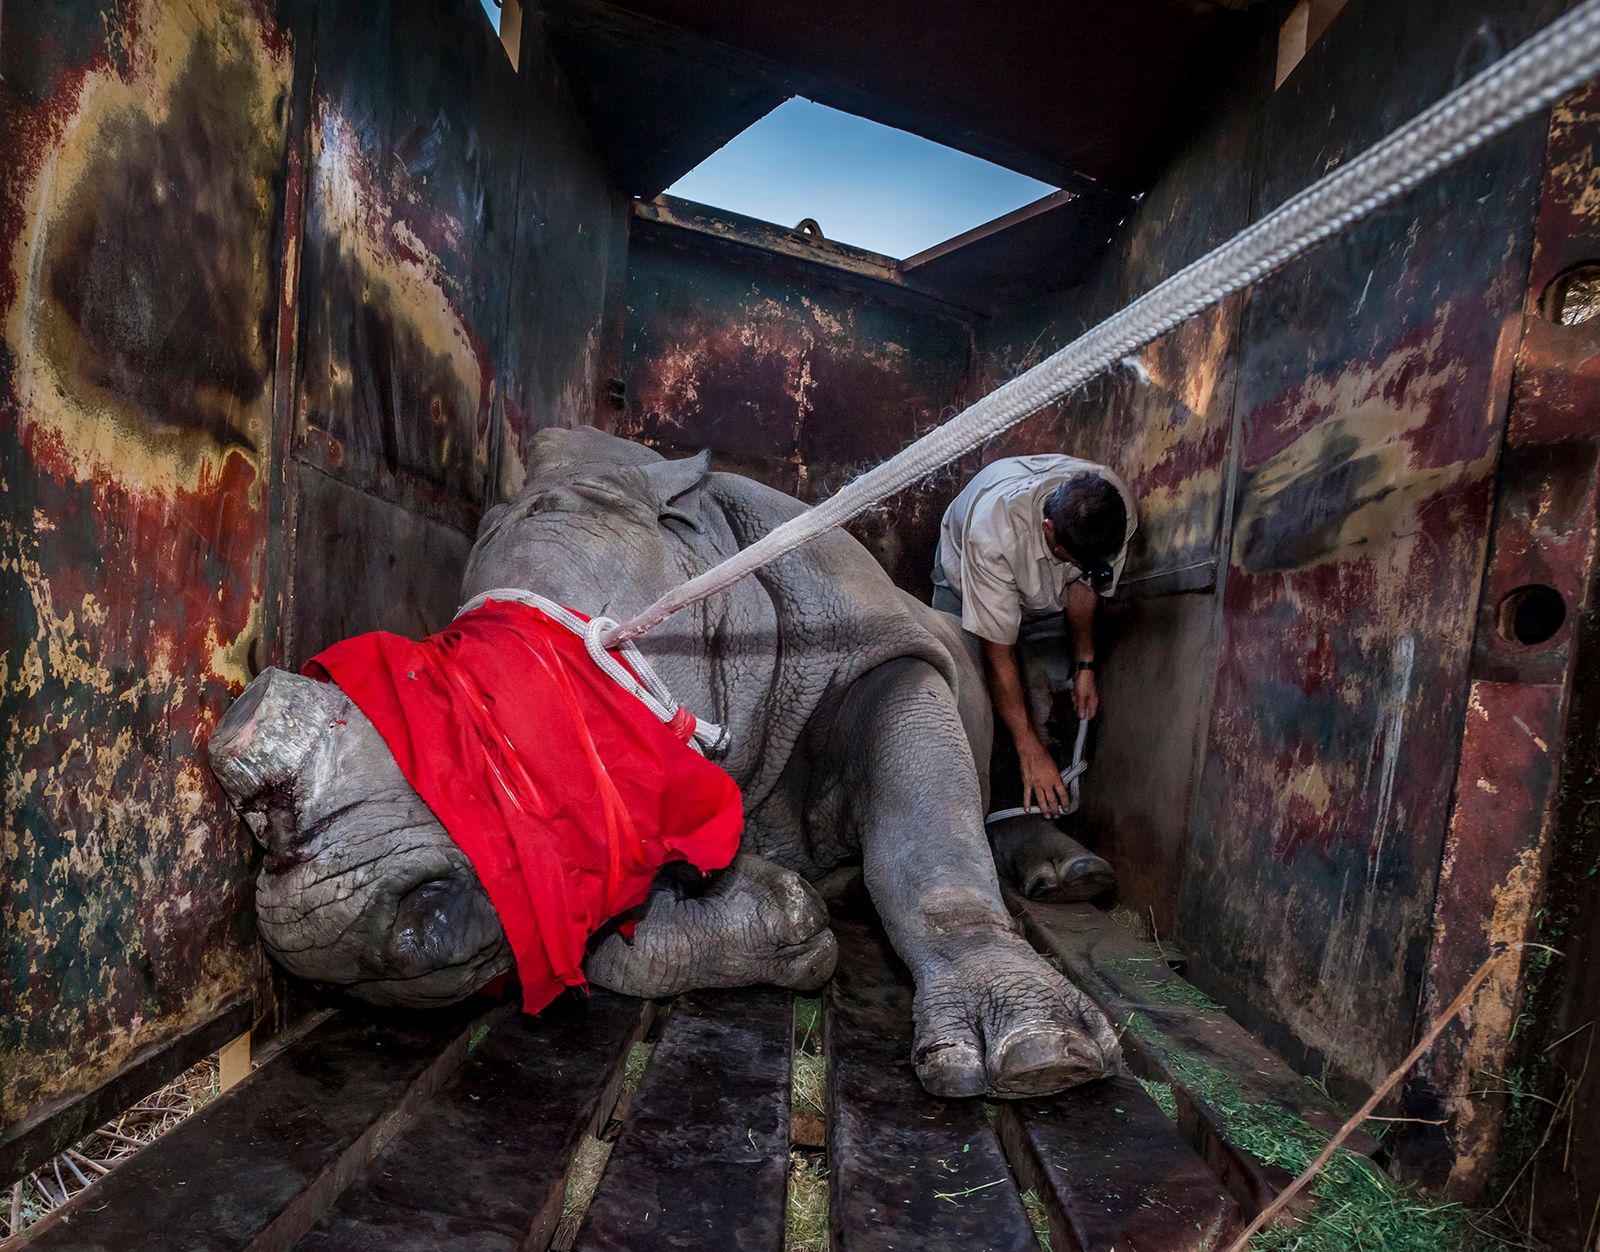 © Neil Aldridge - Image from the The Return of the Rhino photography project